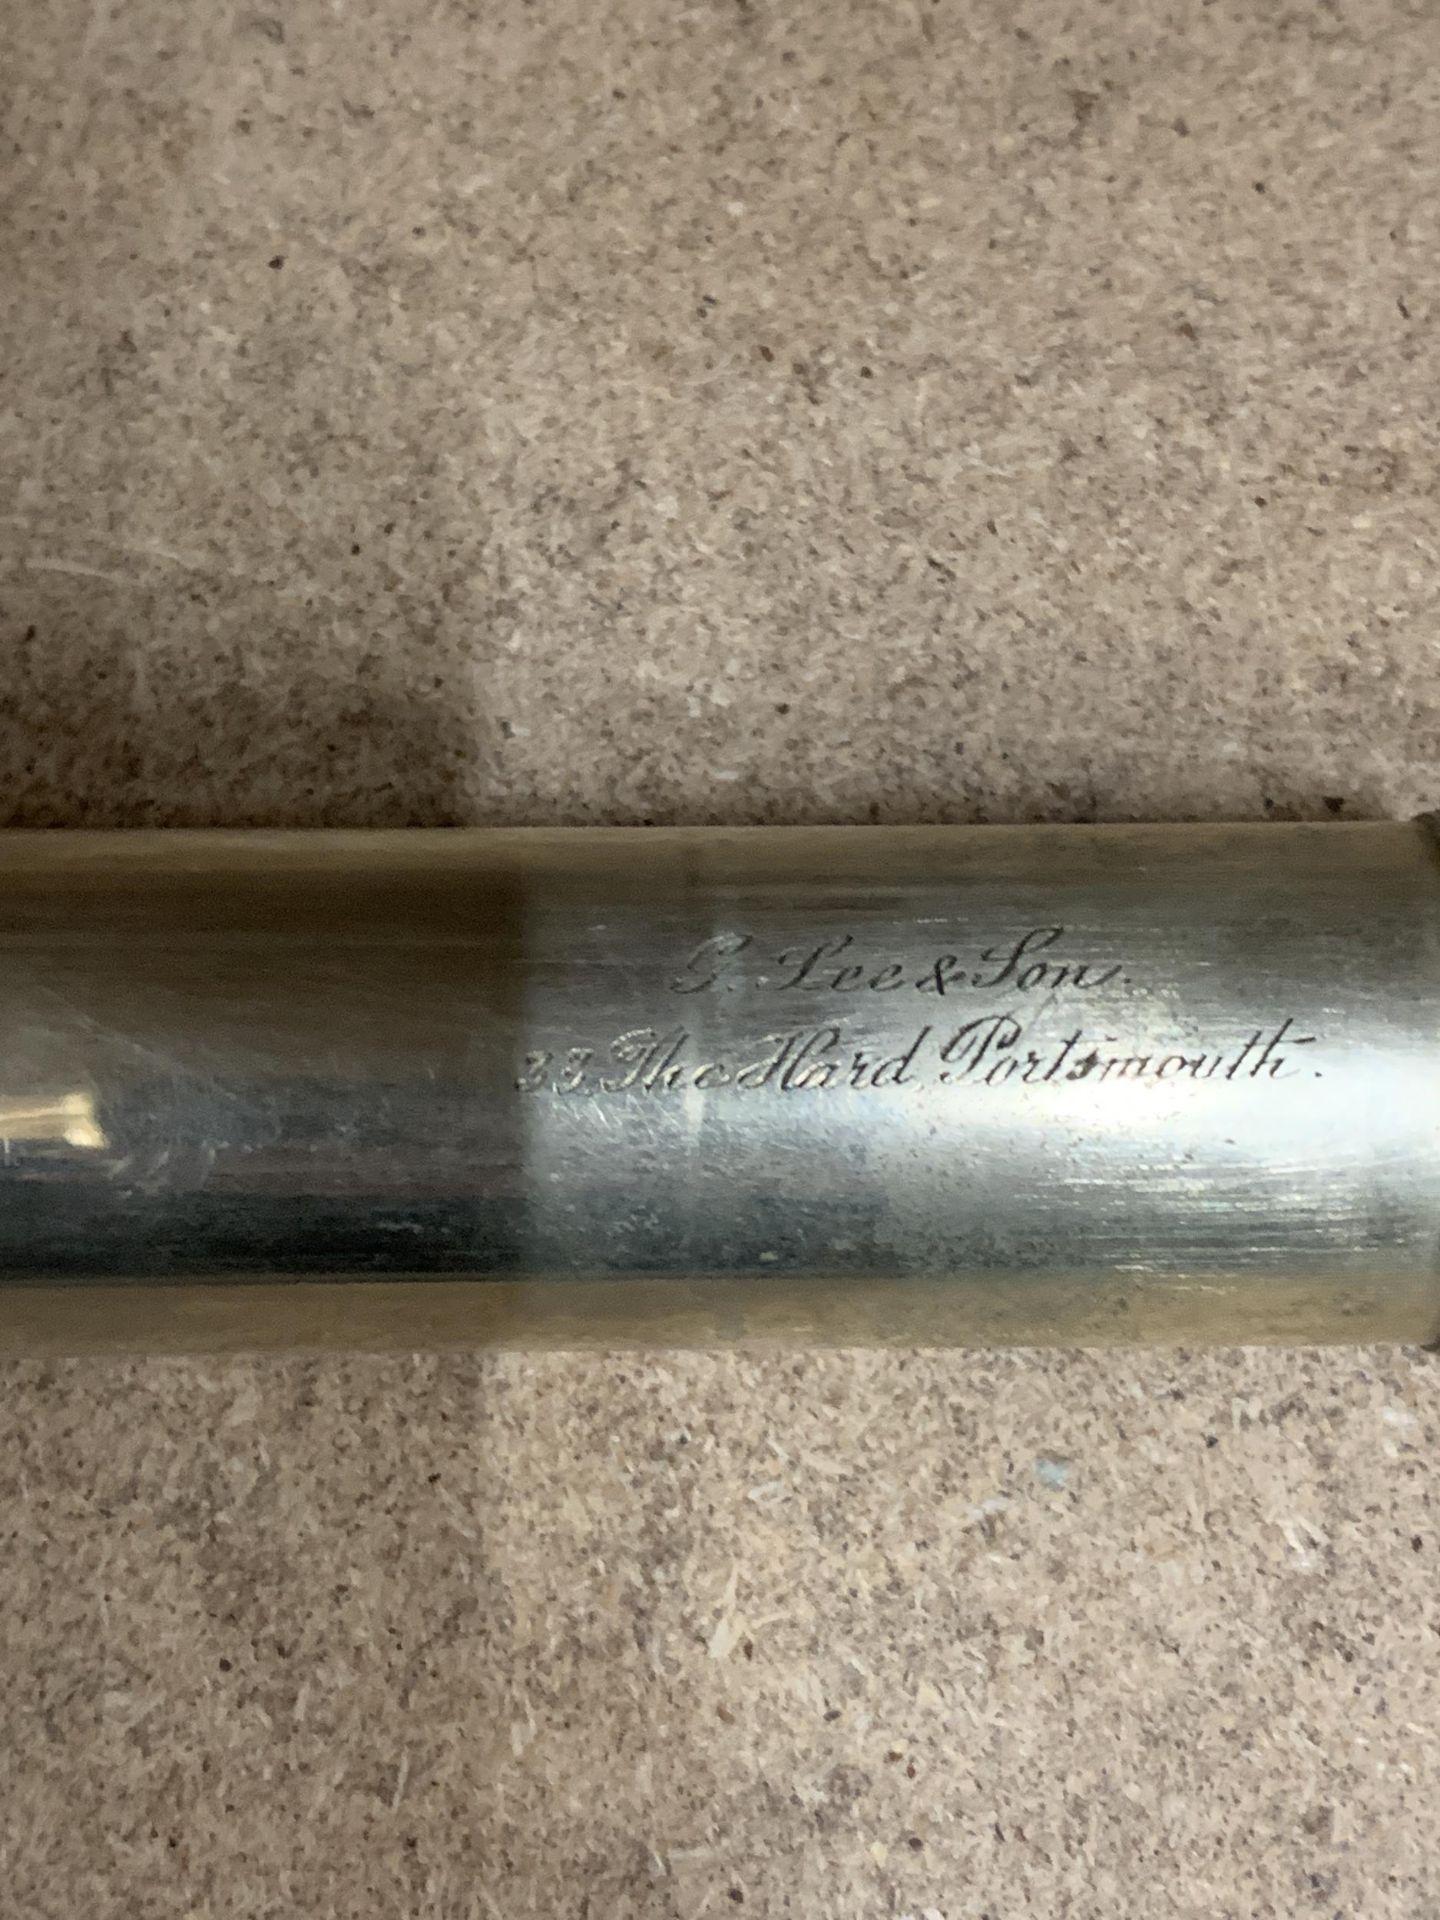 A VINTAGE BRASS TELESCOPE WITH LEATHER CASING MADE BY G LEE AND SON, 33 THE HARD, PORTSMOUTH - Image 2 of 4